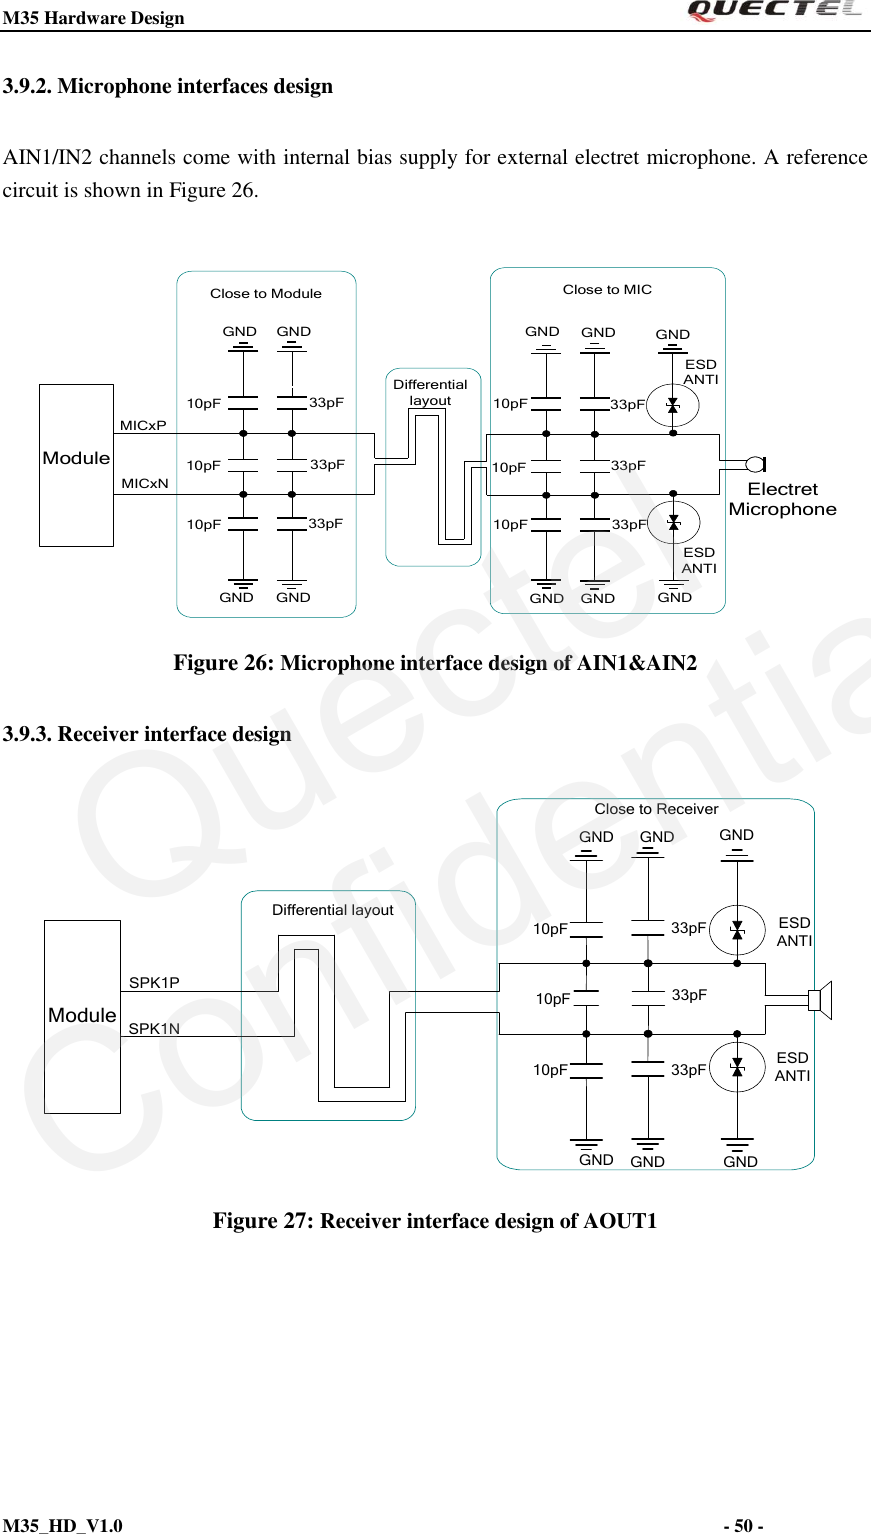 M35 Hardware Design                                                                  M35_HD_V1.0                                                                                                                         - 50 -    3.9.2. Microphone interfaces design AIN1/IN2 channels come with internal bias supply for external electret microphone. A reference circuit is shown in Figure 26.    MICxPDifferential layoutModule 10pF 33pF33pF33pFGNDGNDElectret MicrophoneGNDGND10pF10pFGNDGNDESD ANTIESDANTI33pF10pFClose to ModuleMICxNGNDGNDGNDGND10pF 33pF33pF10pFClose to MIC Figure 26: Microphone interface design of AIN1&amp;AIN2 3.9.3. Receiver interface design SPK1PSPK1NDifferential layout10pF10pF33pF33pF33pFGNDGND10pFESD ANTIESD ANTIModuleClose to ReceiverGNDGNDGND GND Figure 27: Receiver interface design of AOUT1  QuectelConfidential